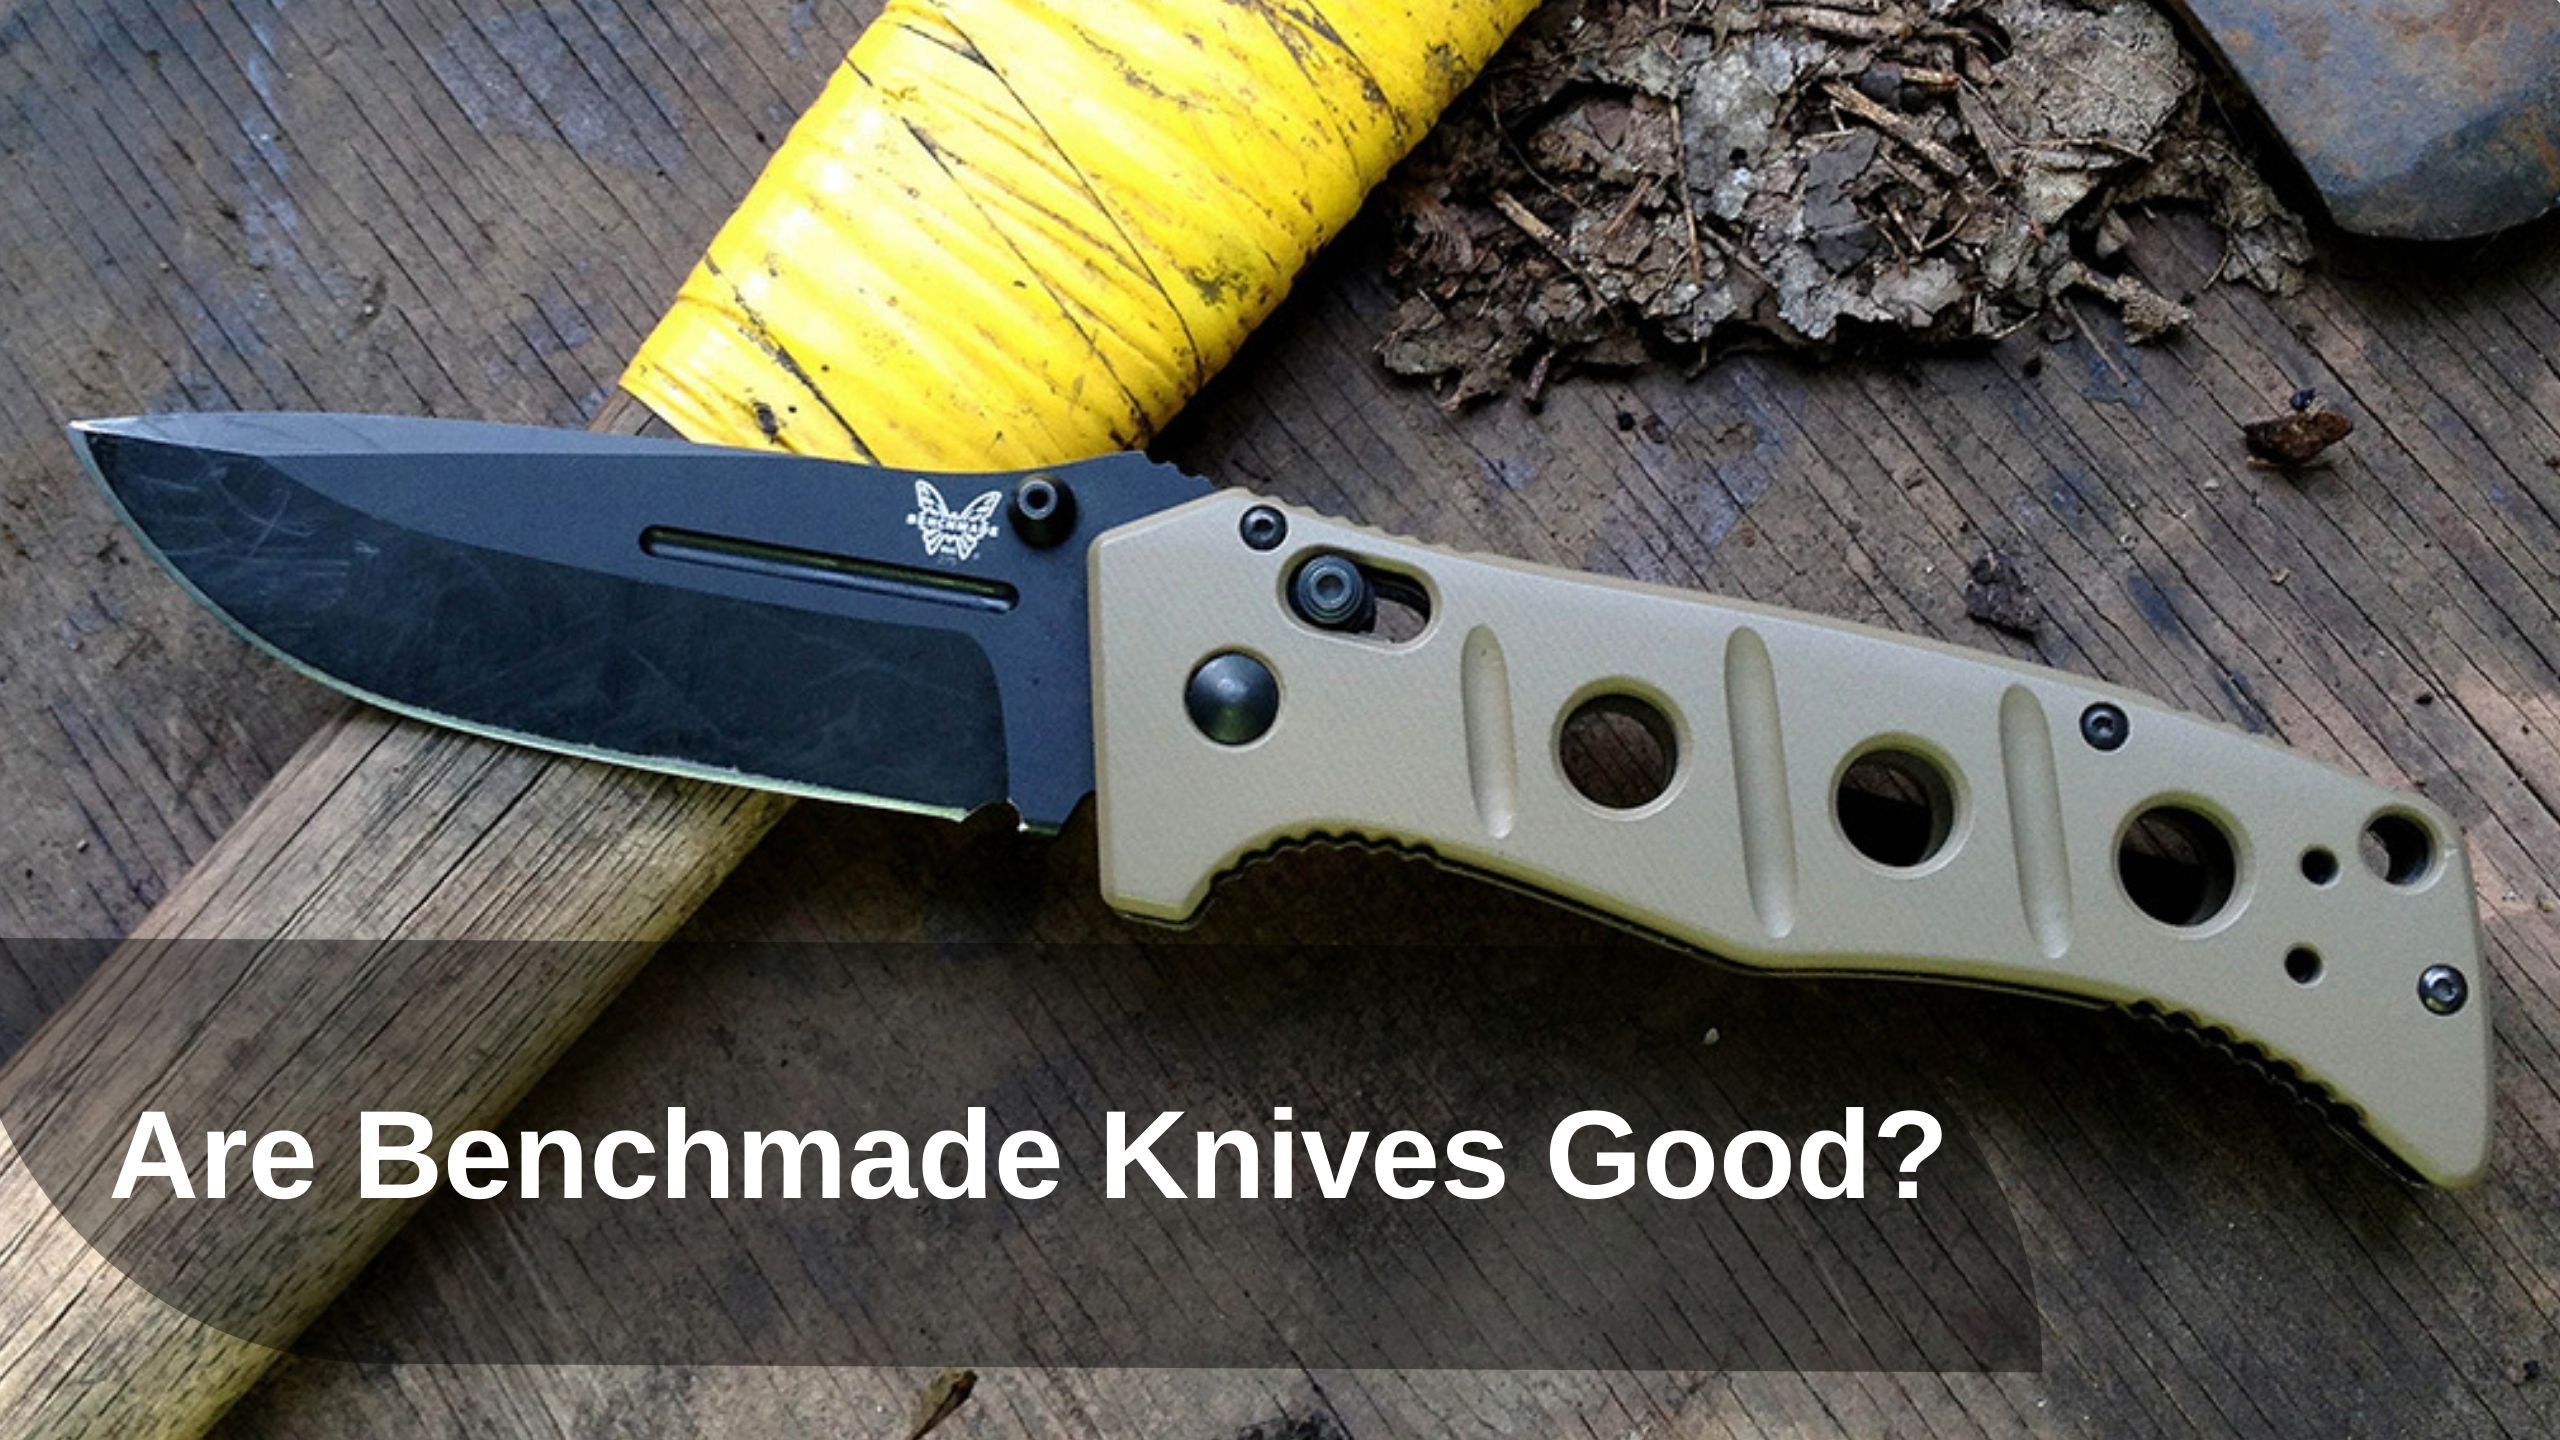 Are Benchmade Knives Good?